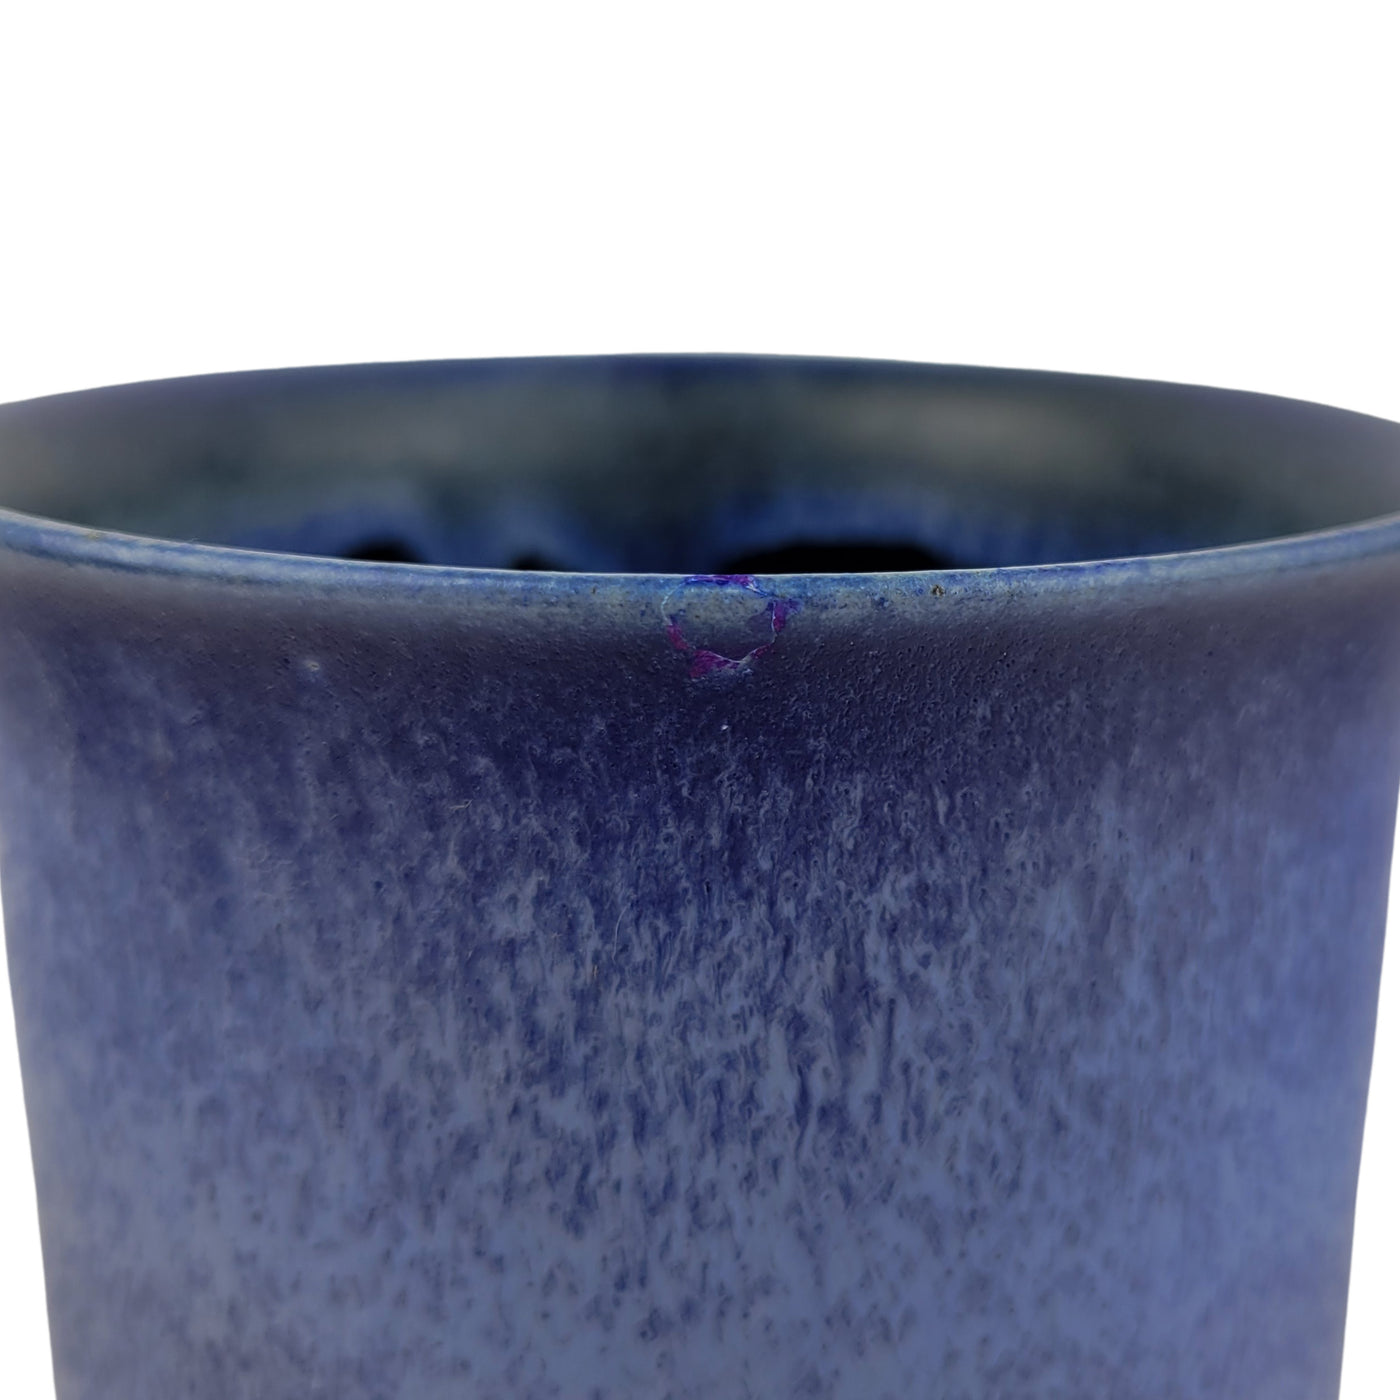 Tortus Flared Cylinder Vase in Blue - Discounts on Tortus at UAL